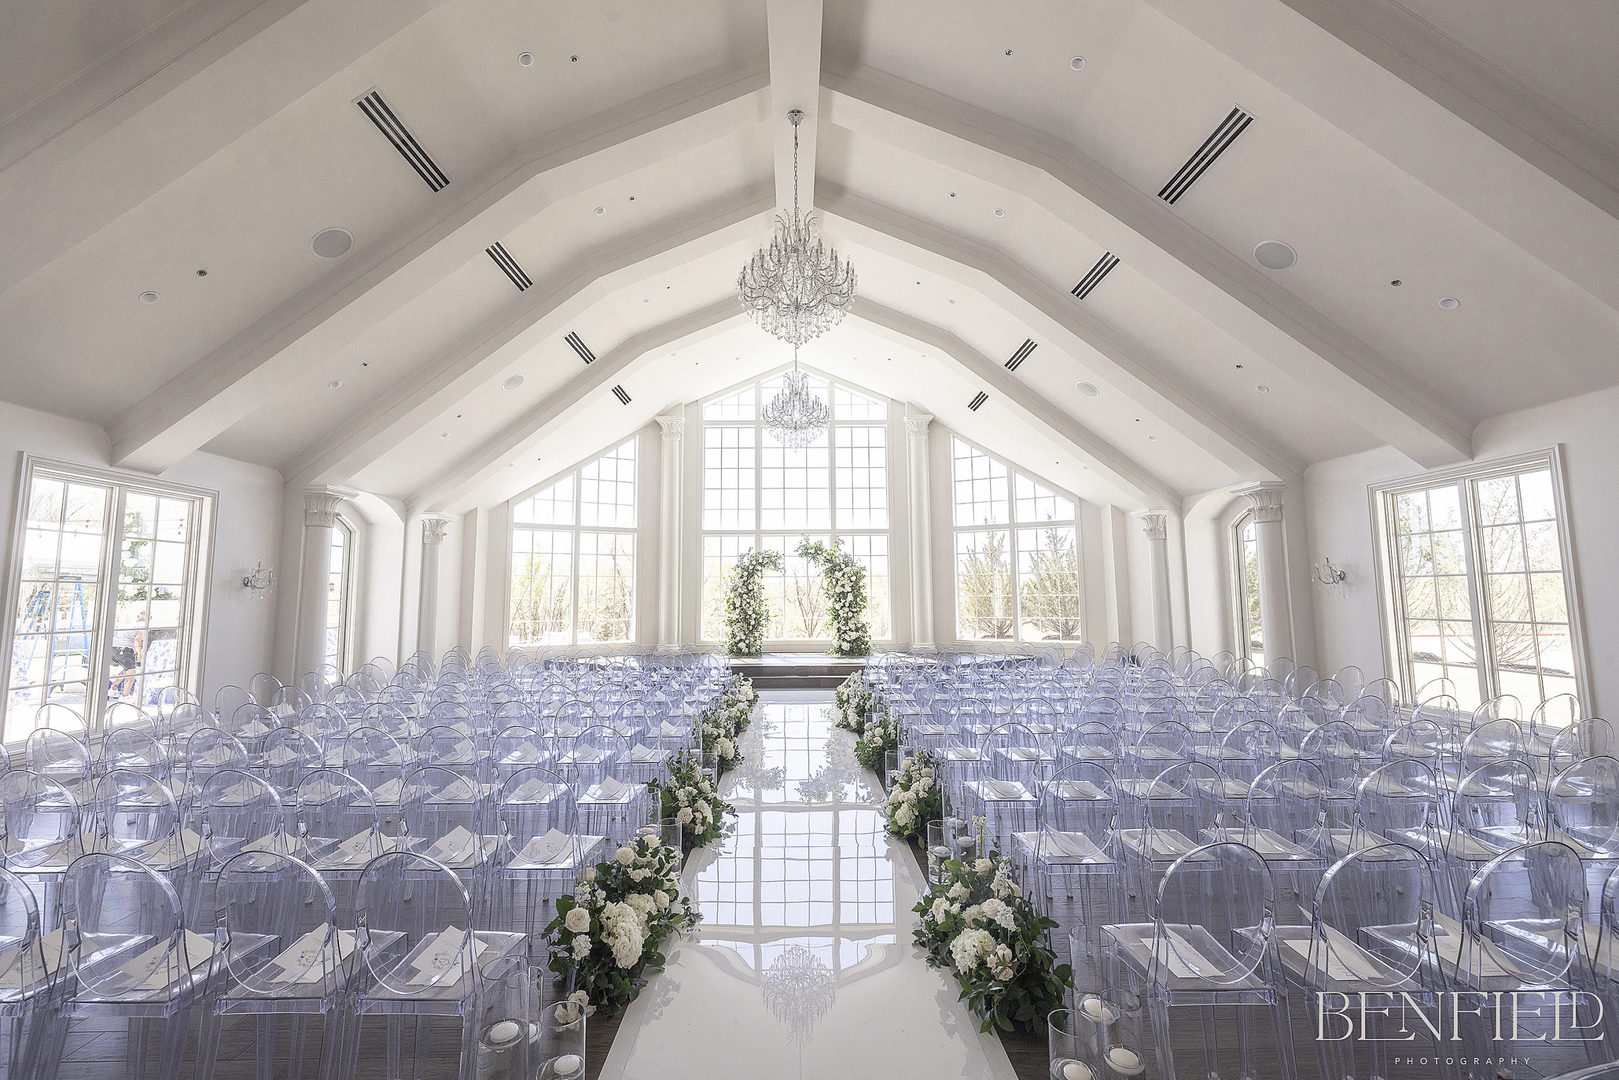 Hillside Estate Wedding Chapel is all white with tons of natural light and acrylic "ghost" chairs.